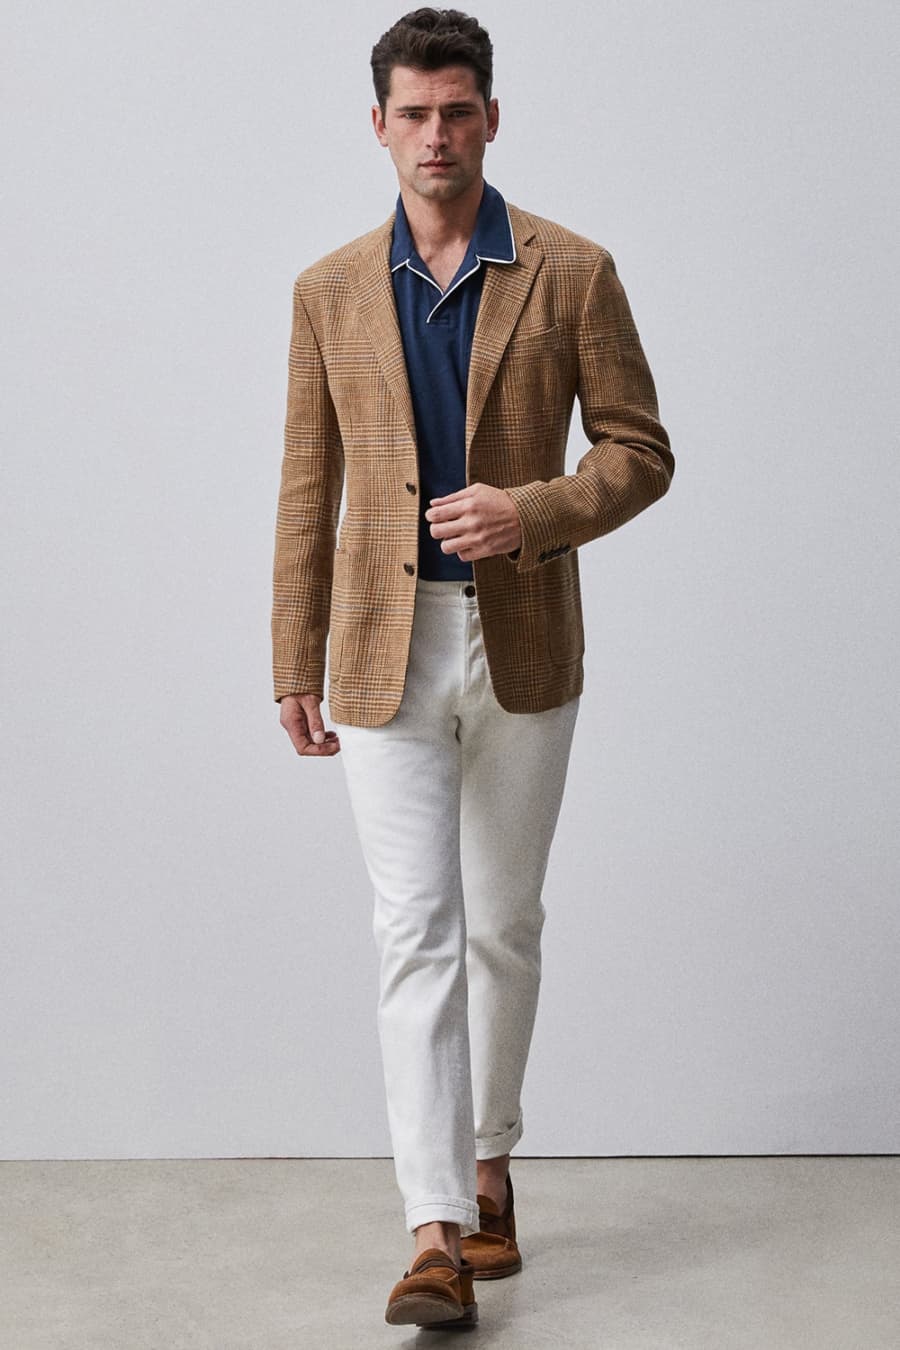 Men's white jeans, brown checked blazer, navy open collar polo shirt and loafers outfit